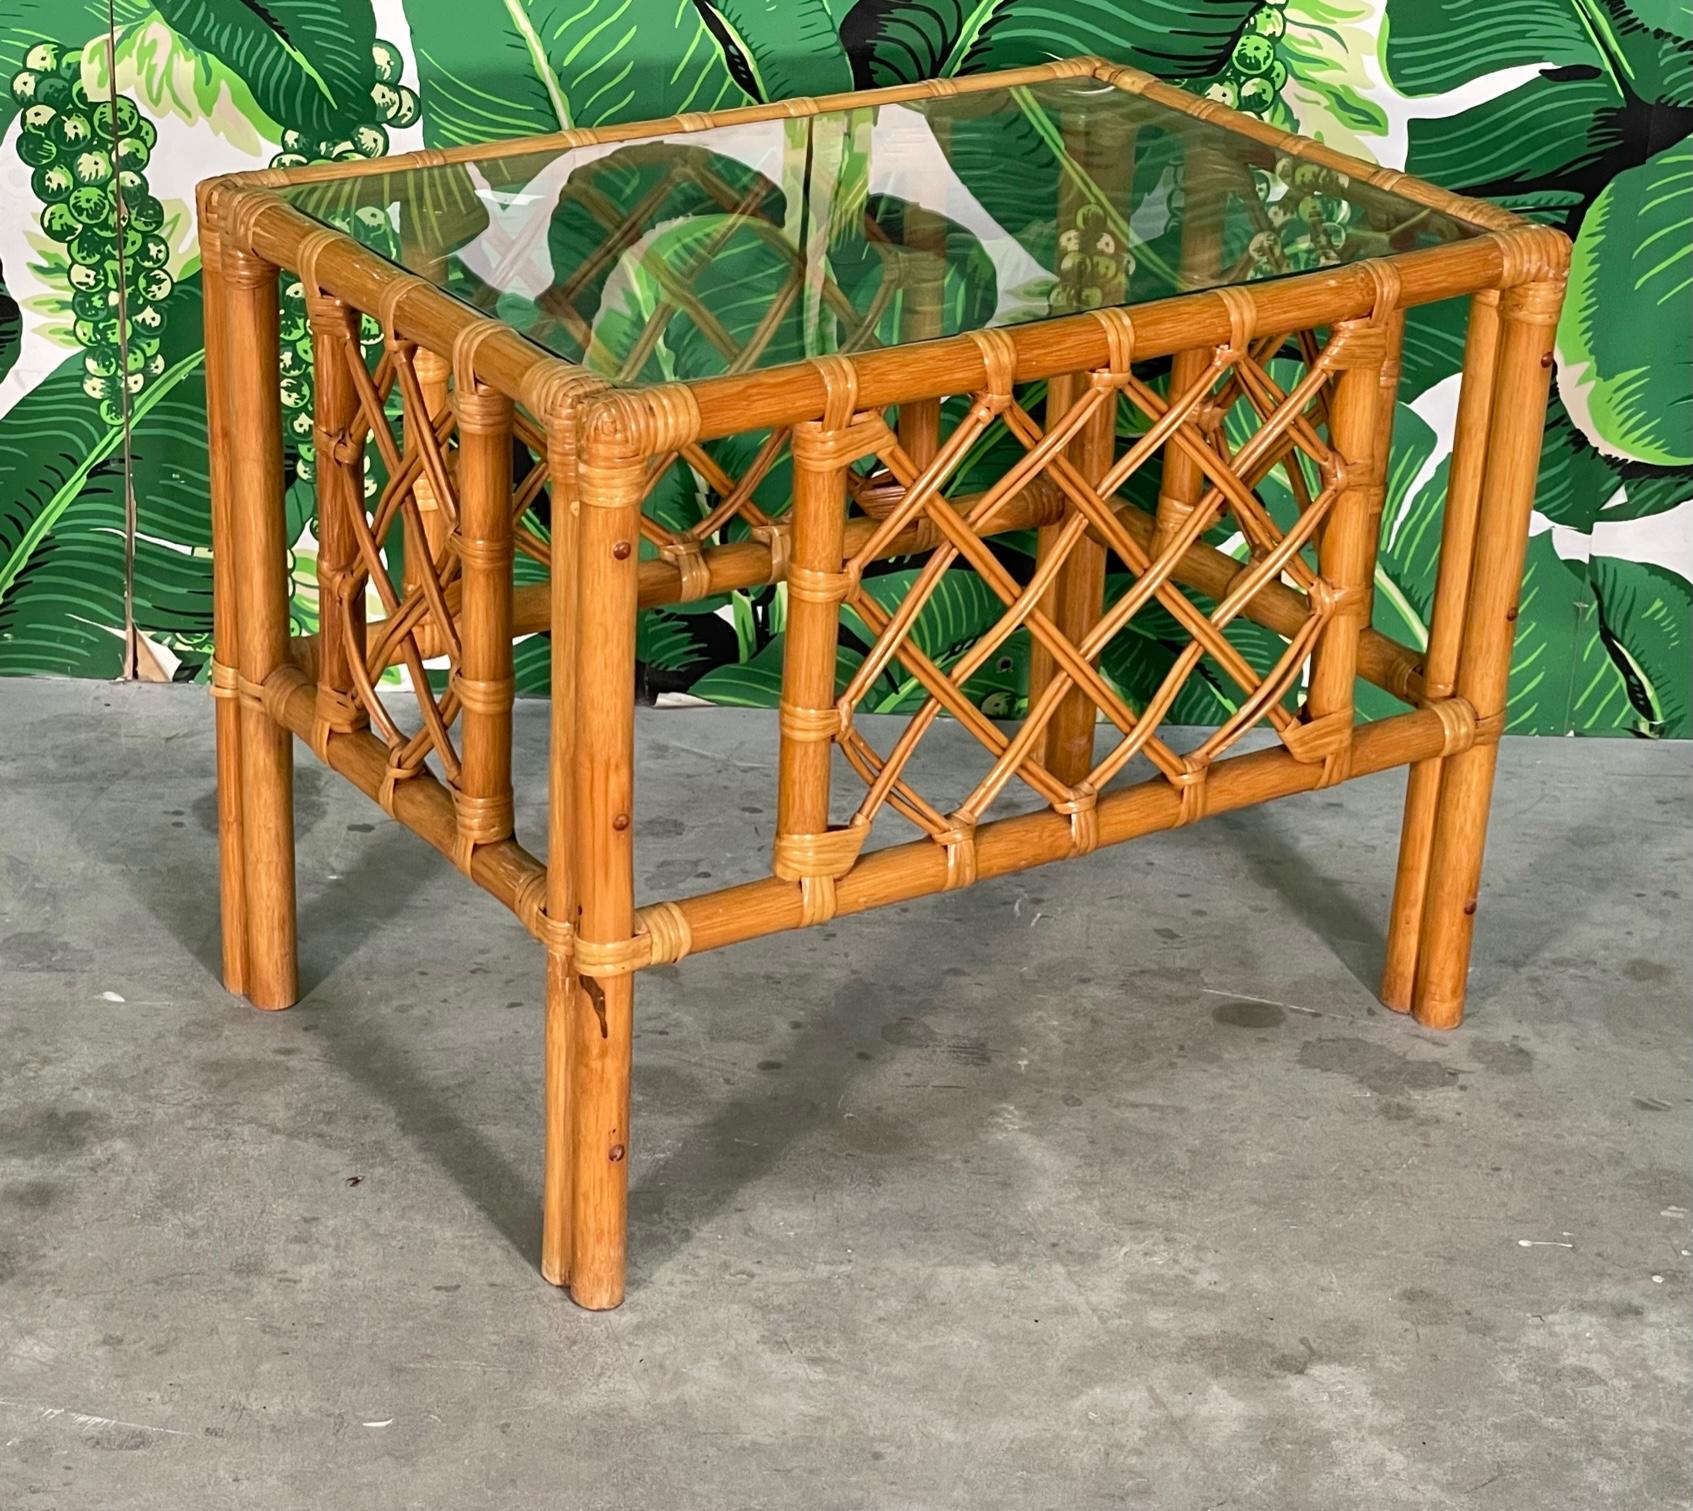 Vintage rattan end/side table features lattice style fretwork and a glass top. Good condition with imperfections consistent with age. May exhibit scuffs, marks, or wear, see photos for details.
 
 